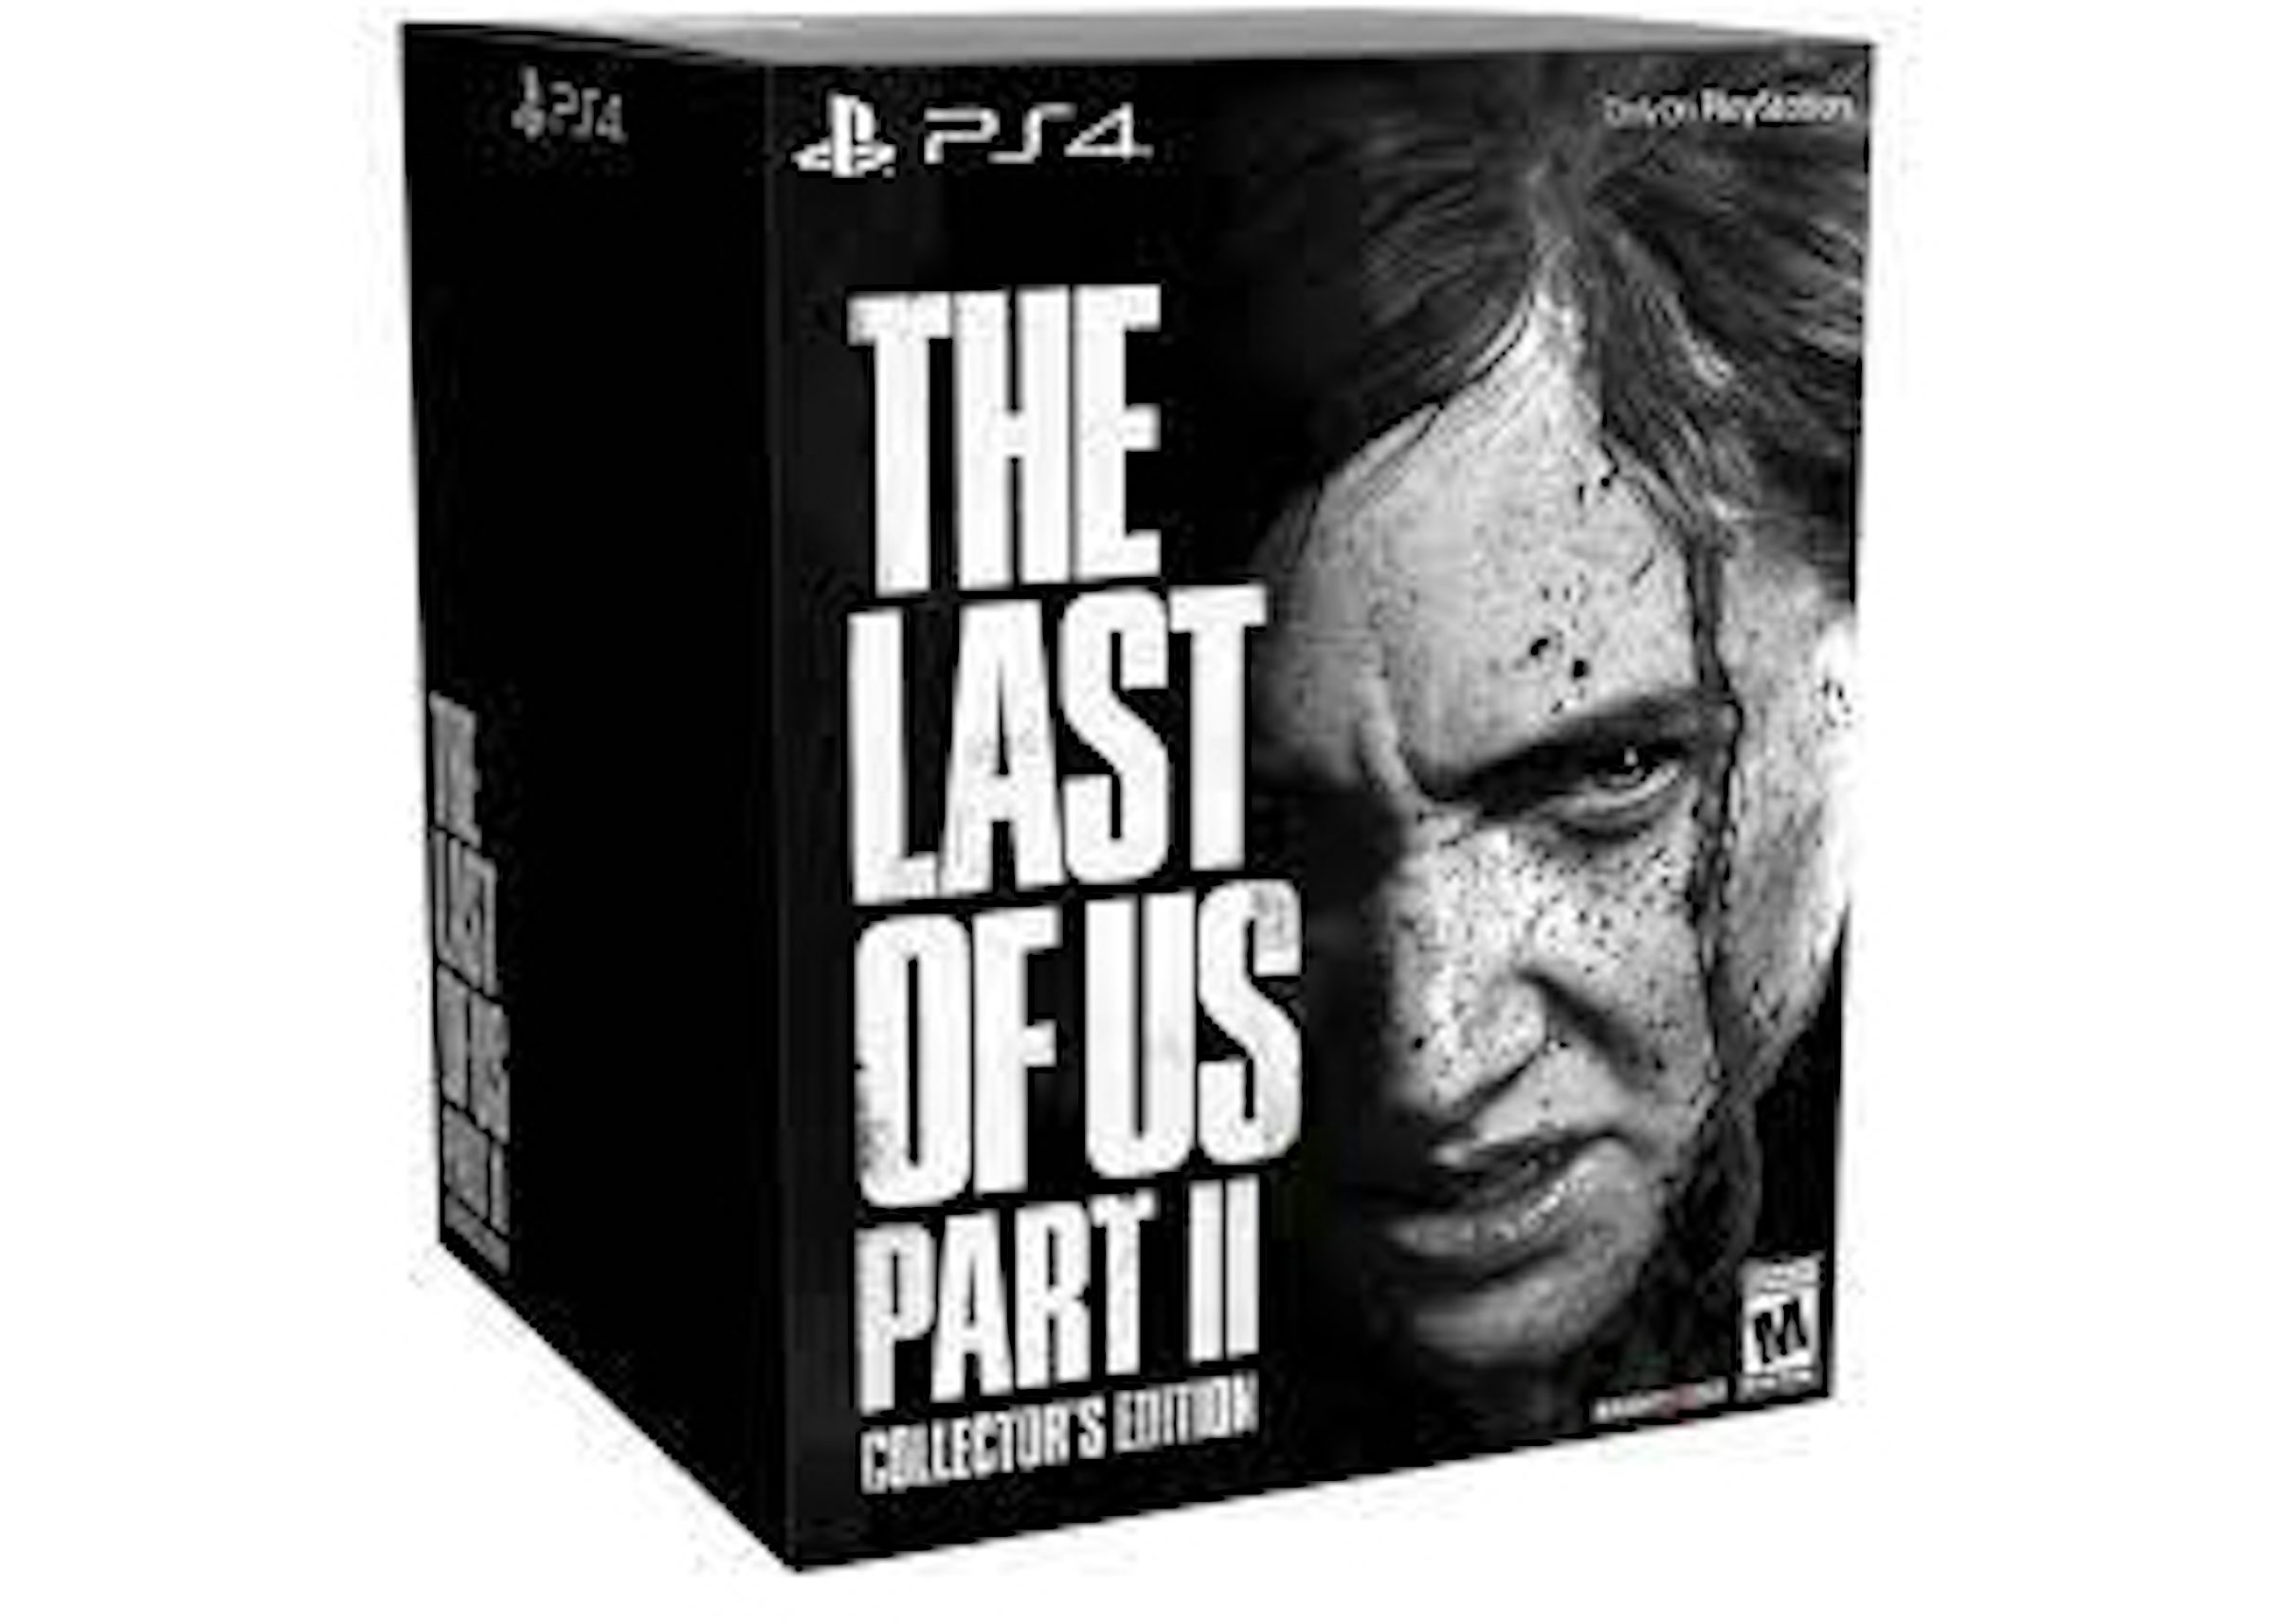 Sony PS4 The Last of Us Part II Collector's Edition Video Game Bundle  3004285 - US